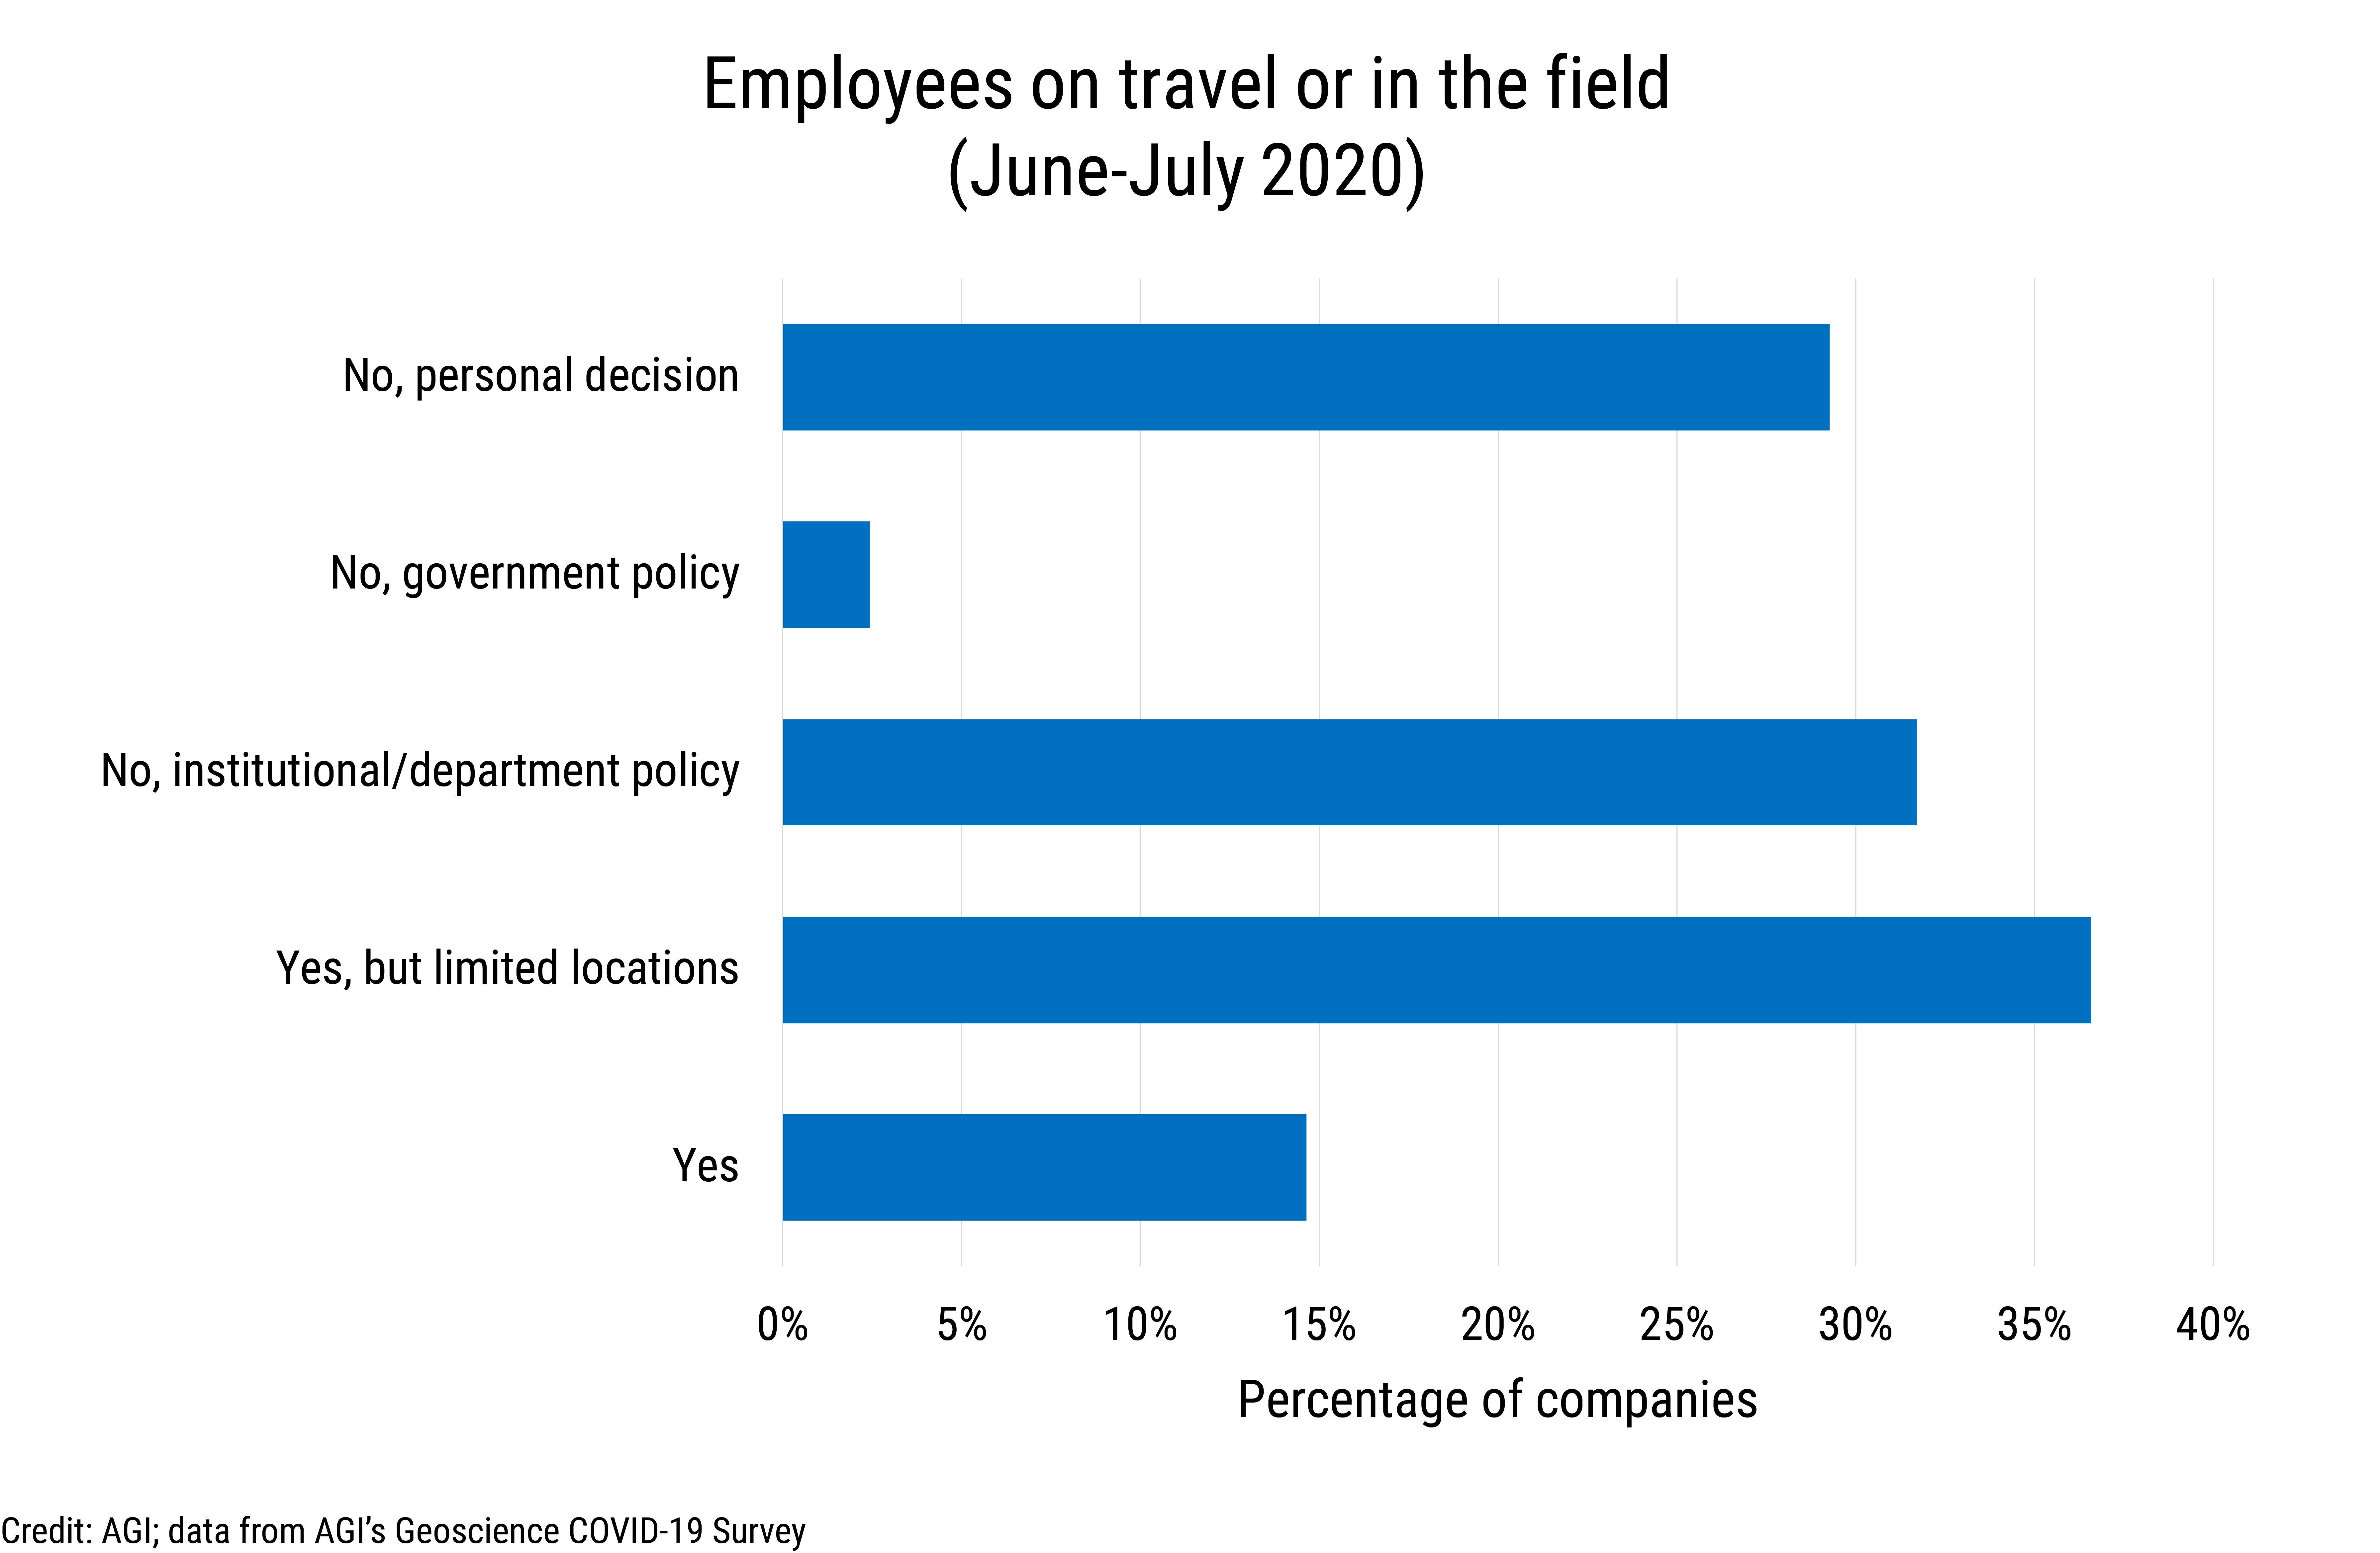 Data Brief 2020-012 chart-03: Employees on travel or in the field (June-July 2020). (Credit: AGI; data from AGI's Geoscience COVID-19 Survey)